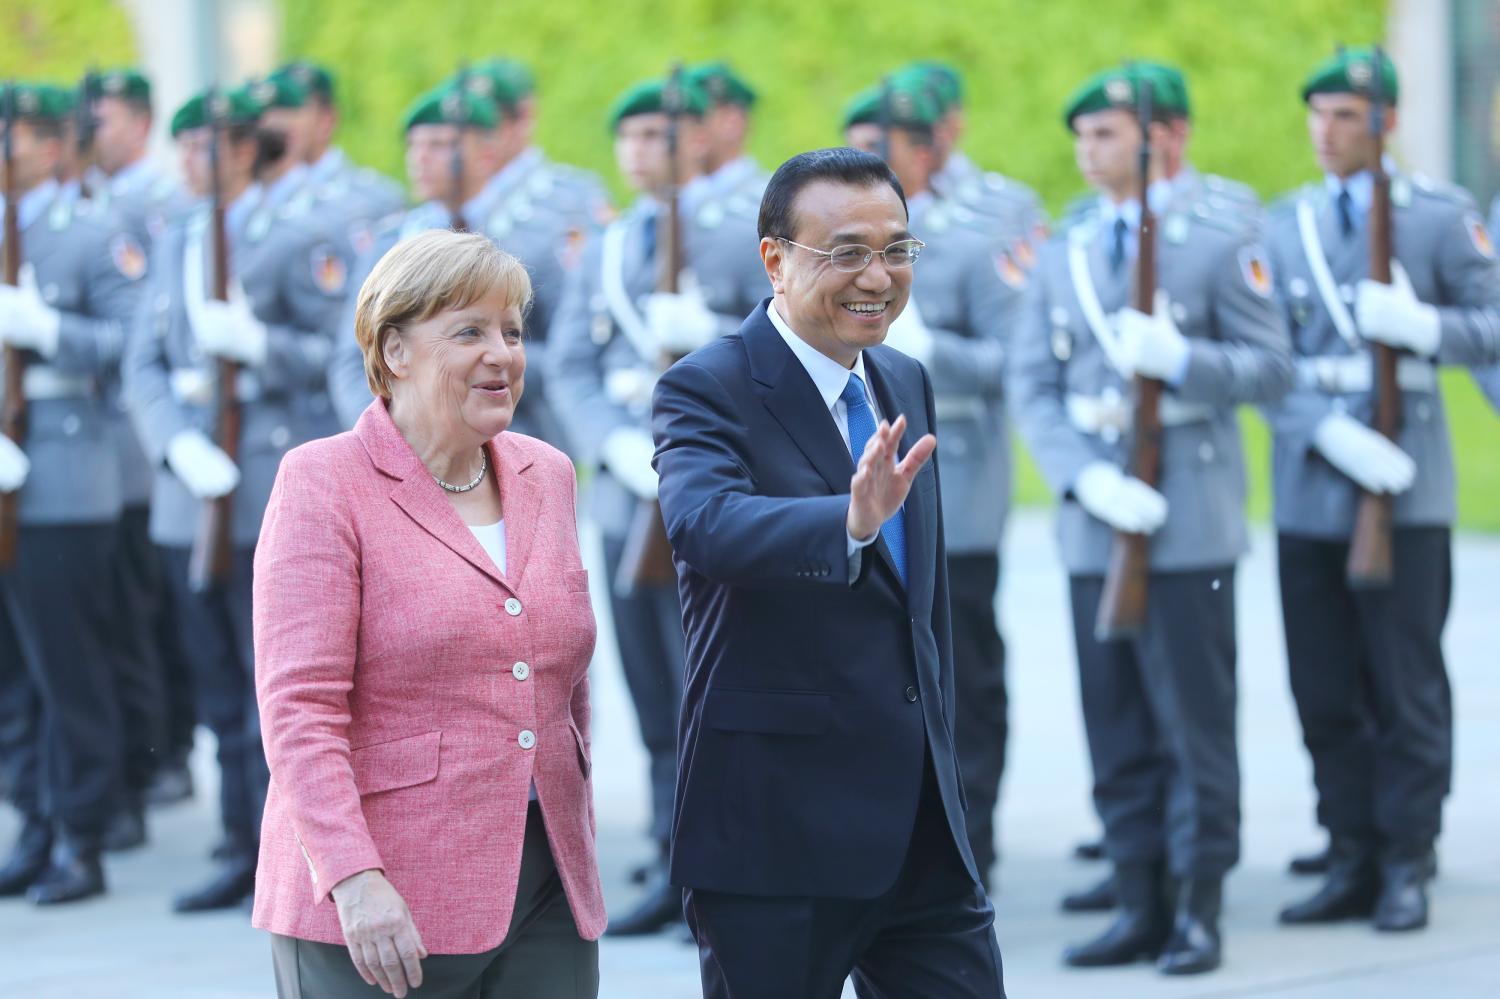 German Chancellor Angela Merkel and Chinese Premier Li Keqiang review the guard of honour during a welcome ceremony at the Chancellery in Berlin, Germany, May 31, 2017. REUTERS/Hannibal Hanschke